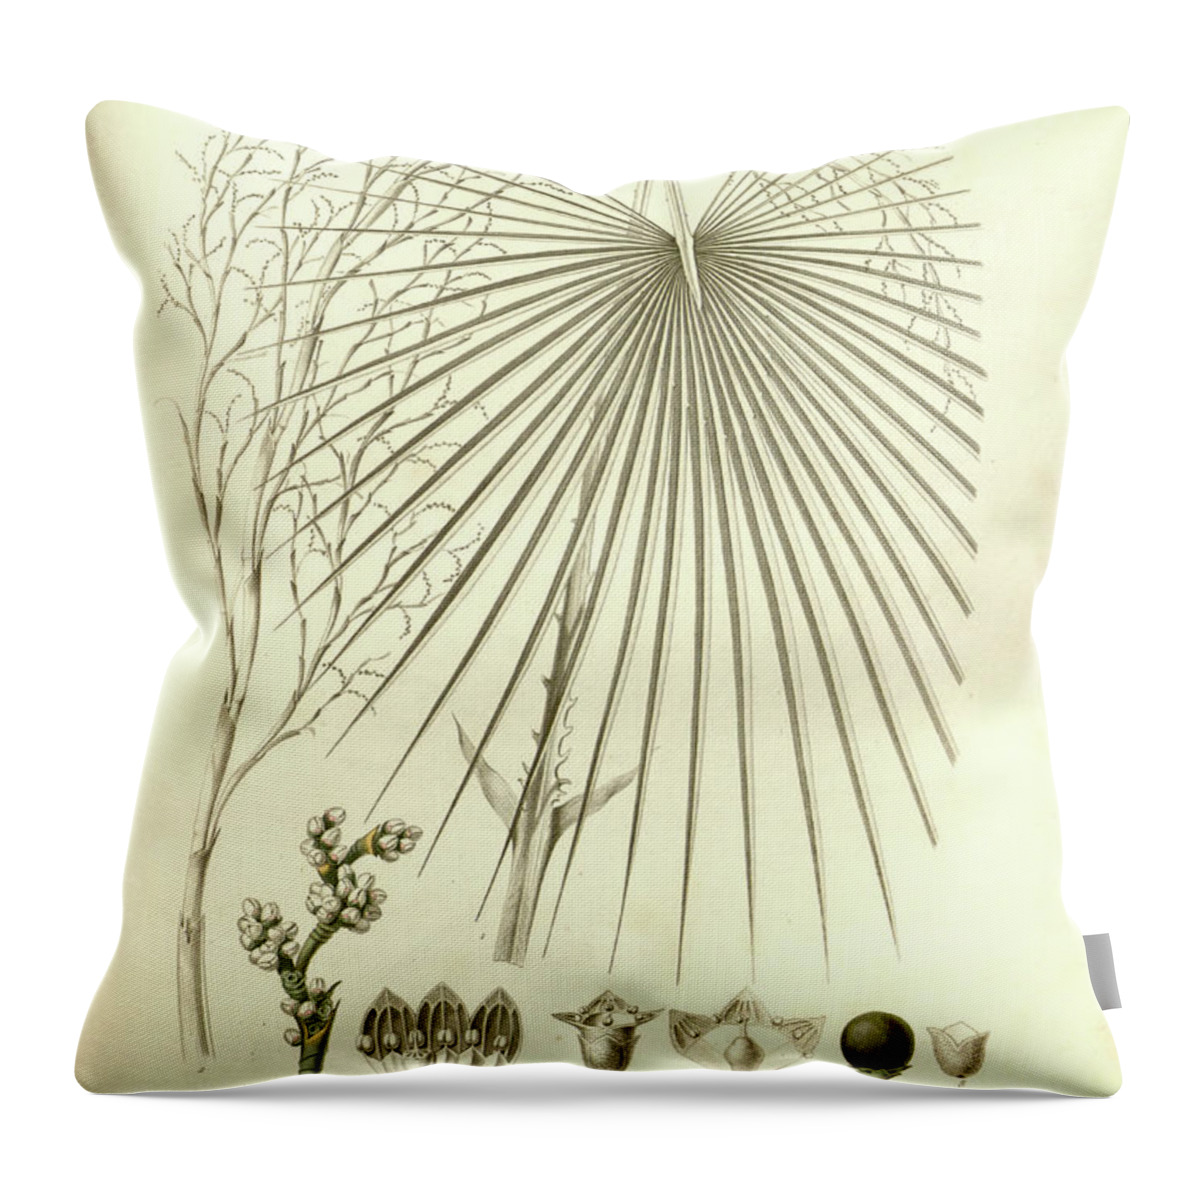 Details Throw Pillow featuring the photograph details of Palm tree parts u3 by Botany